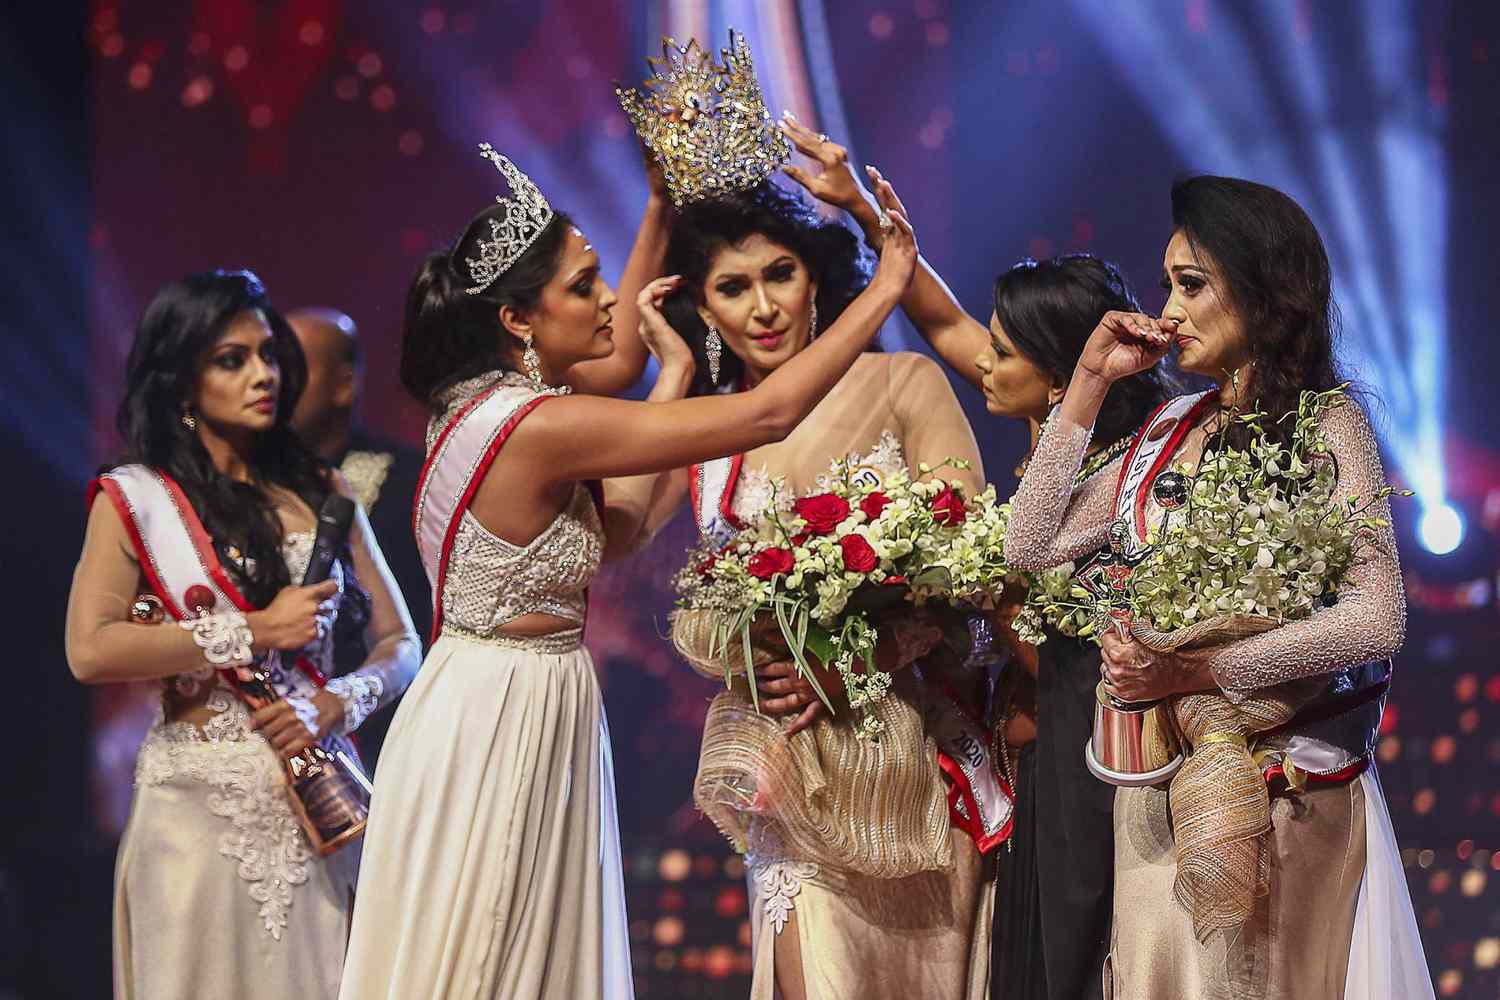 In this photograph taken on April 4, 2021, winner of Mrs. Sri Lanka 2020 Caroline Jurie (2-L) removes the crown of 2021 winner Pushpika de Silva (C) as she is disqualified by the jurie over the accusation of being divorced, at a beauty pageant for married women in Colombo